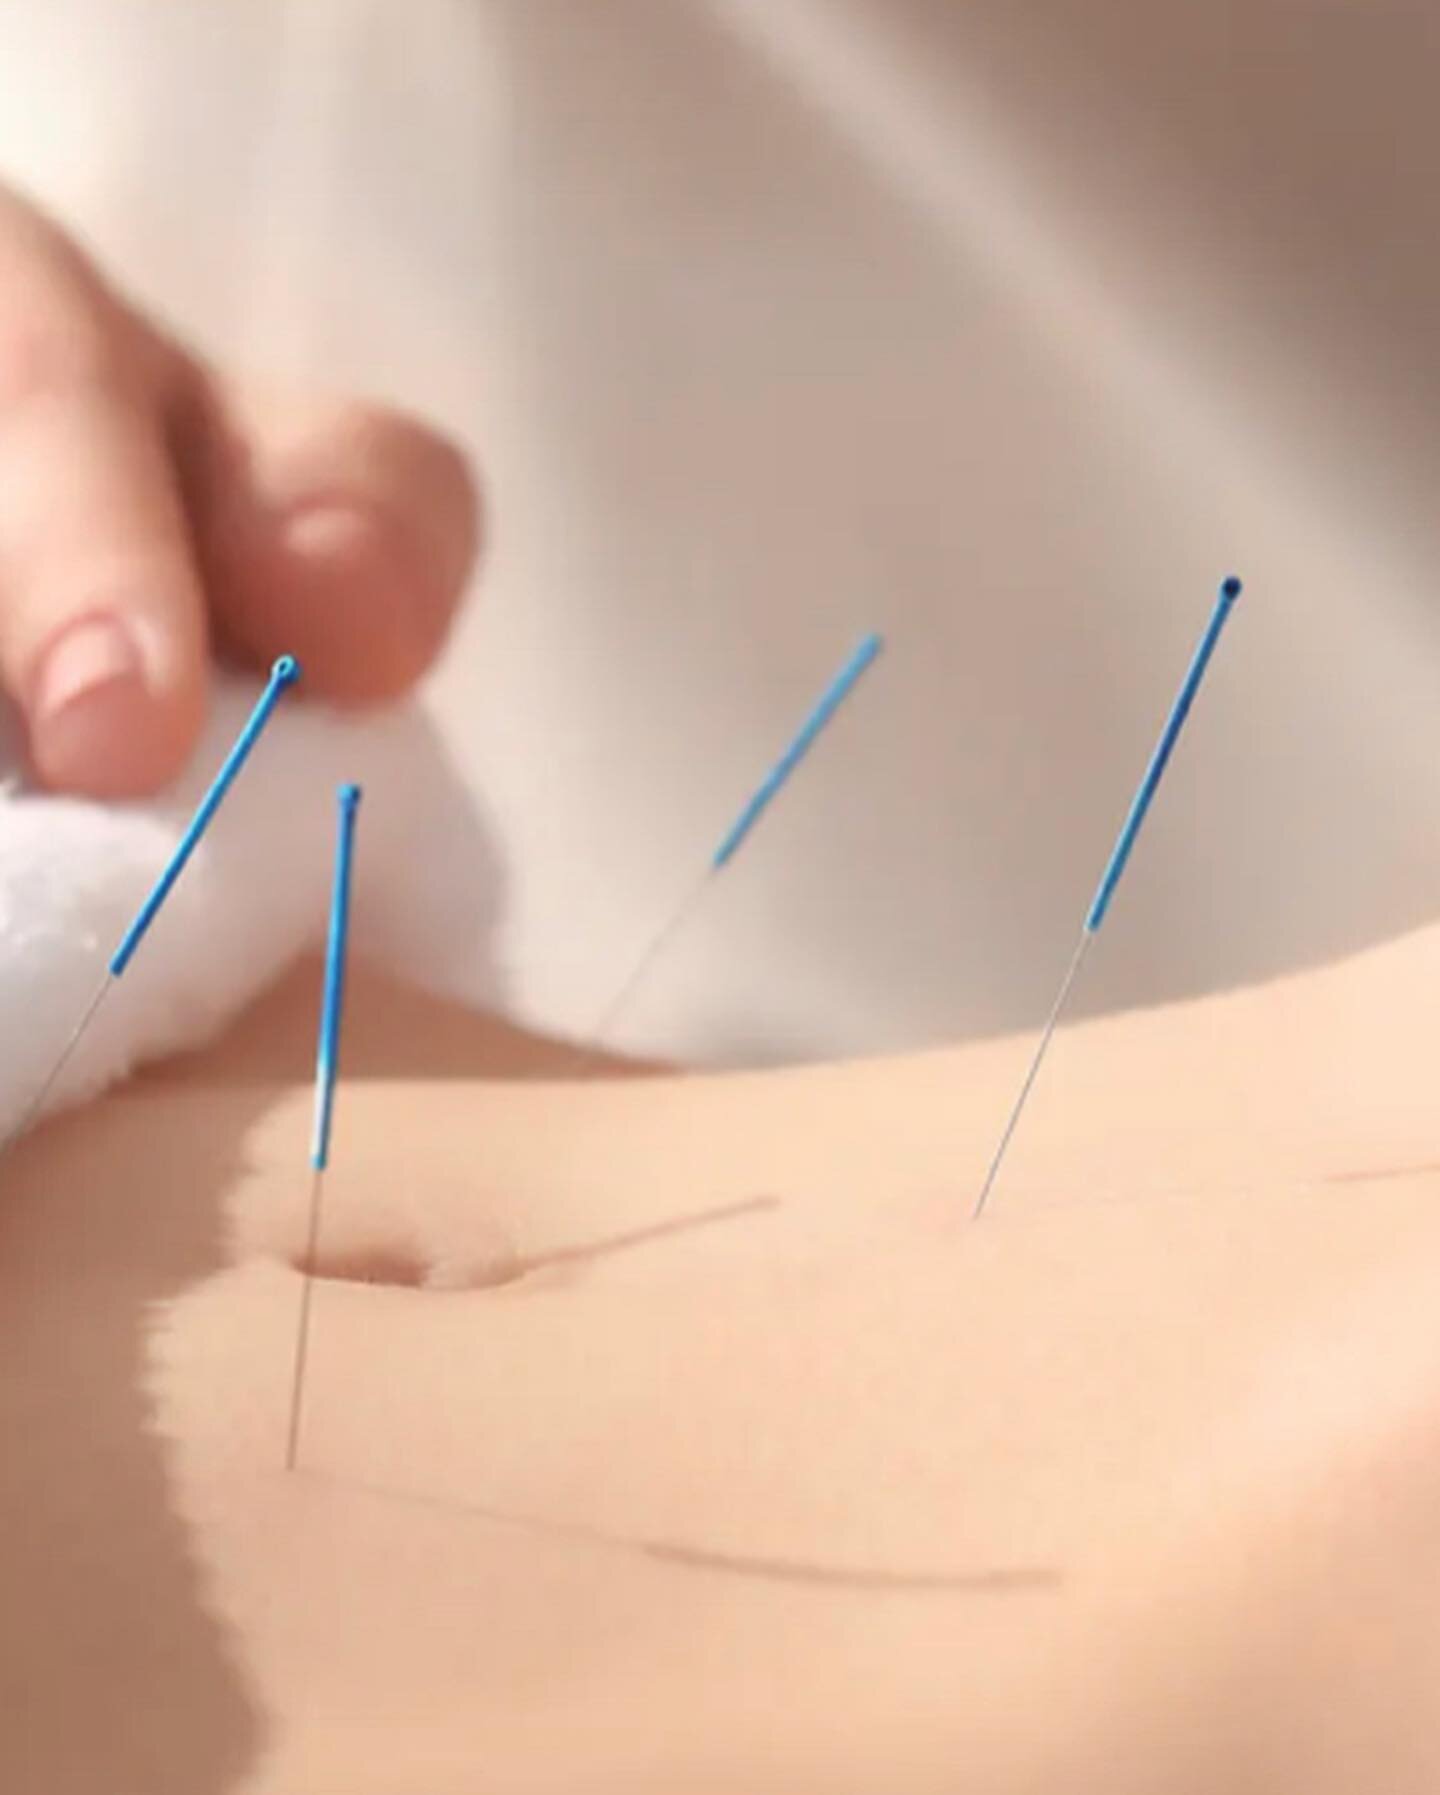 A win for ACUPUNCTURE and ENDOMETRIOSIS -related chronic pelvic pain sufferers!

Hot off the press is the results of a feasibility study on #acupuncture and #endometriosis.

Research found that acupuncture twice a week for 8 weeks was a safe and feas